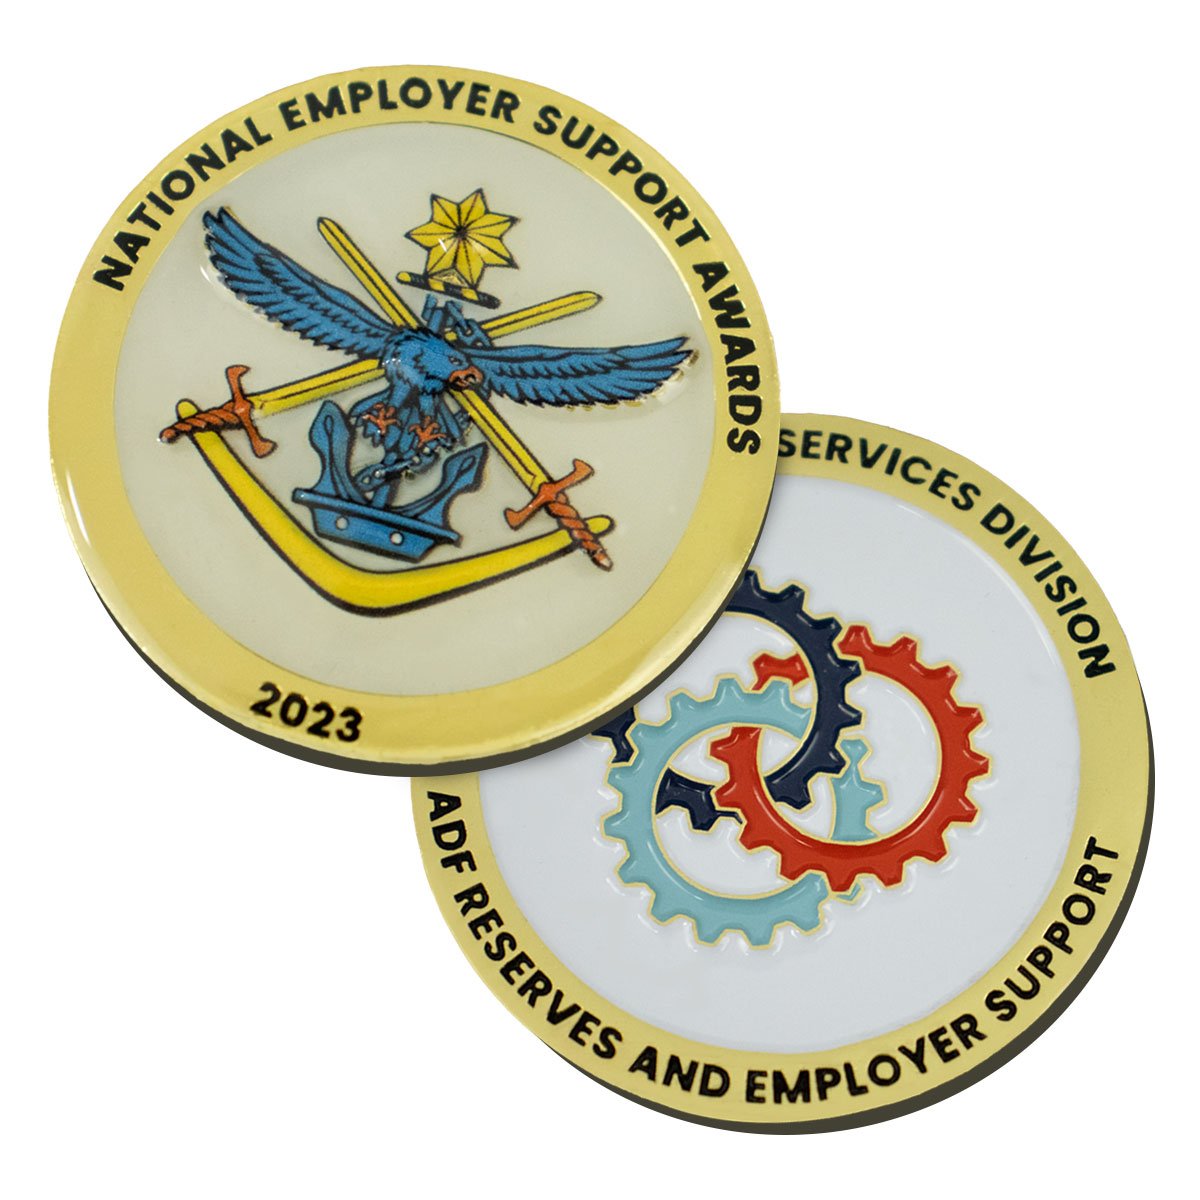 National Employer Support